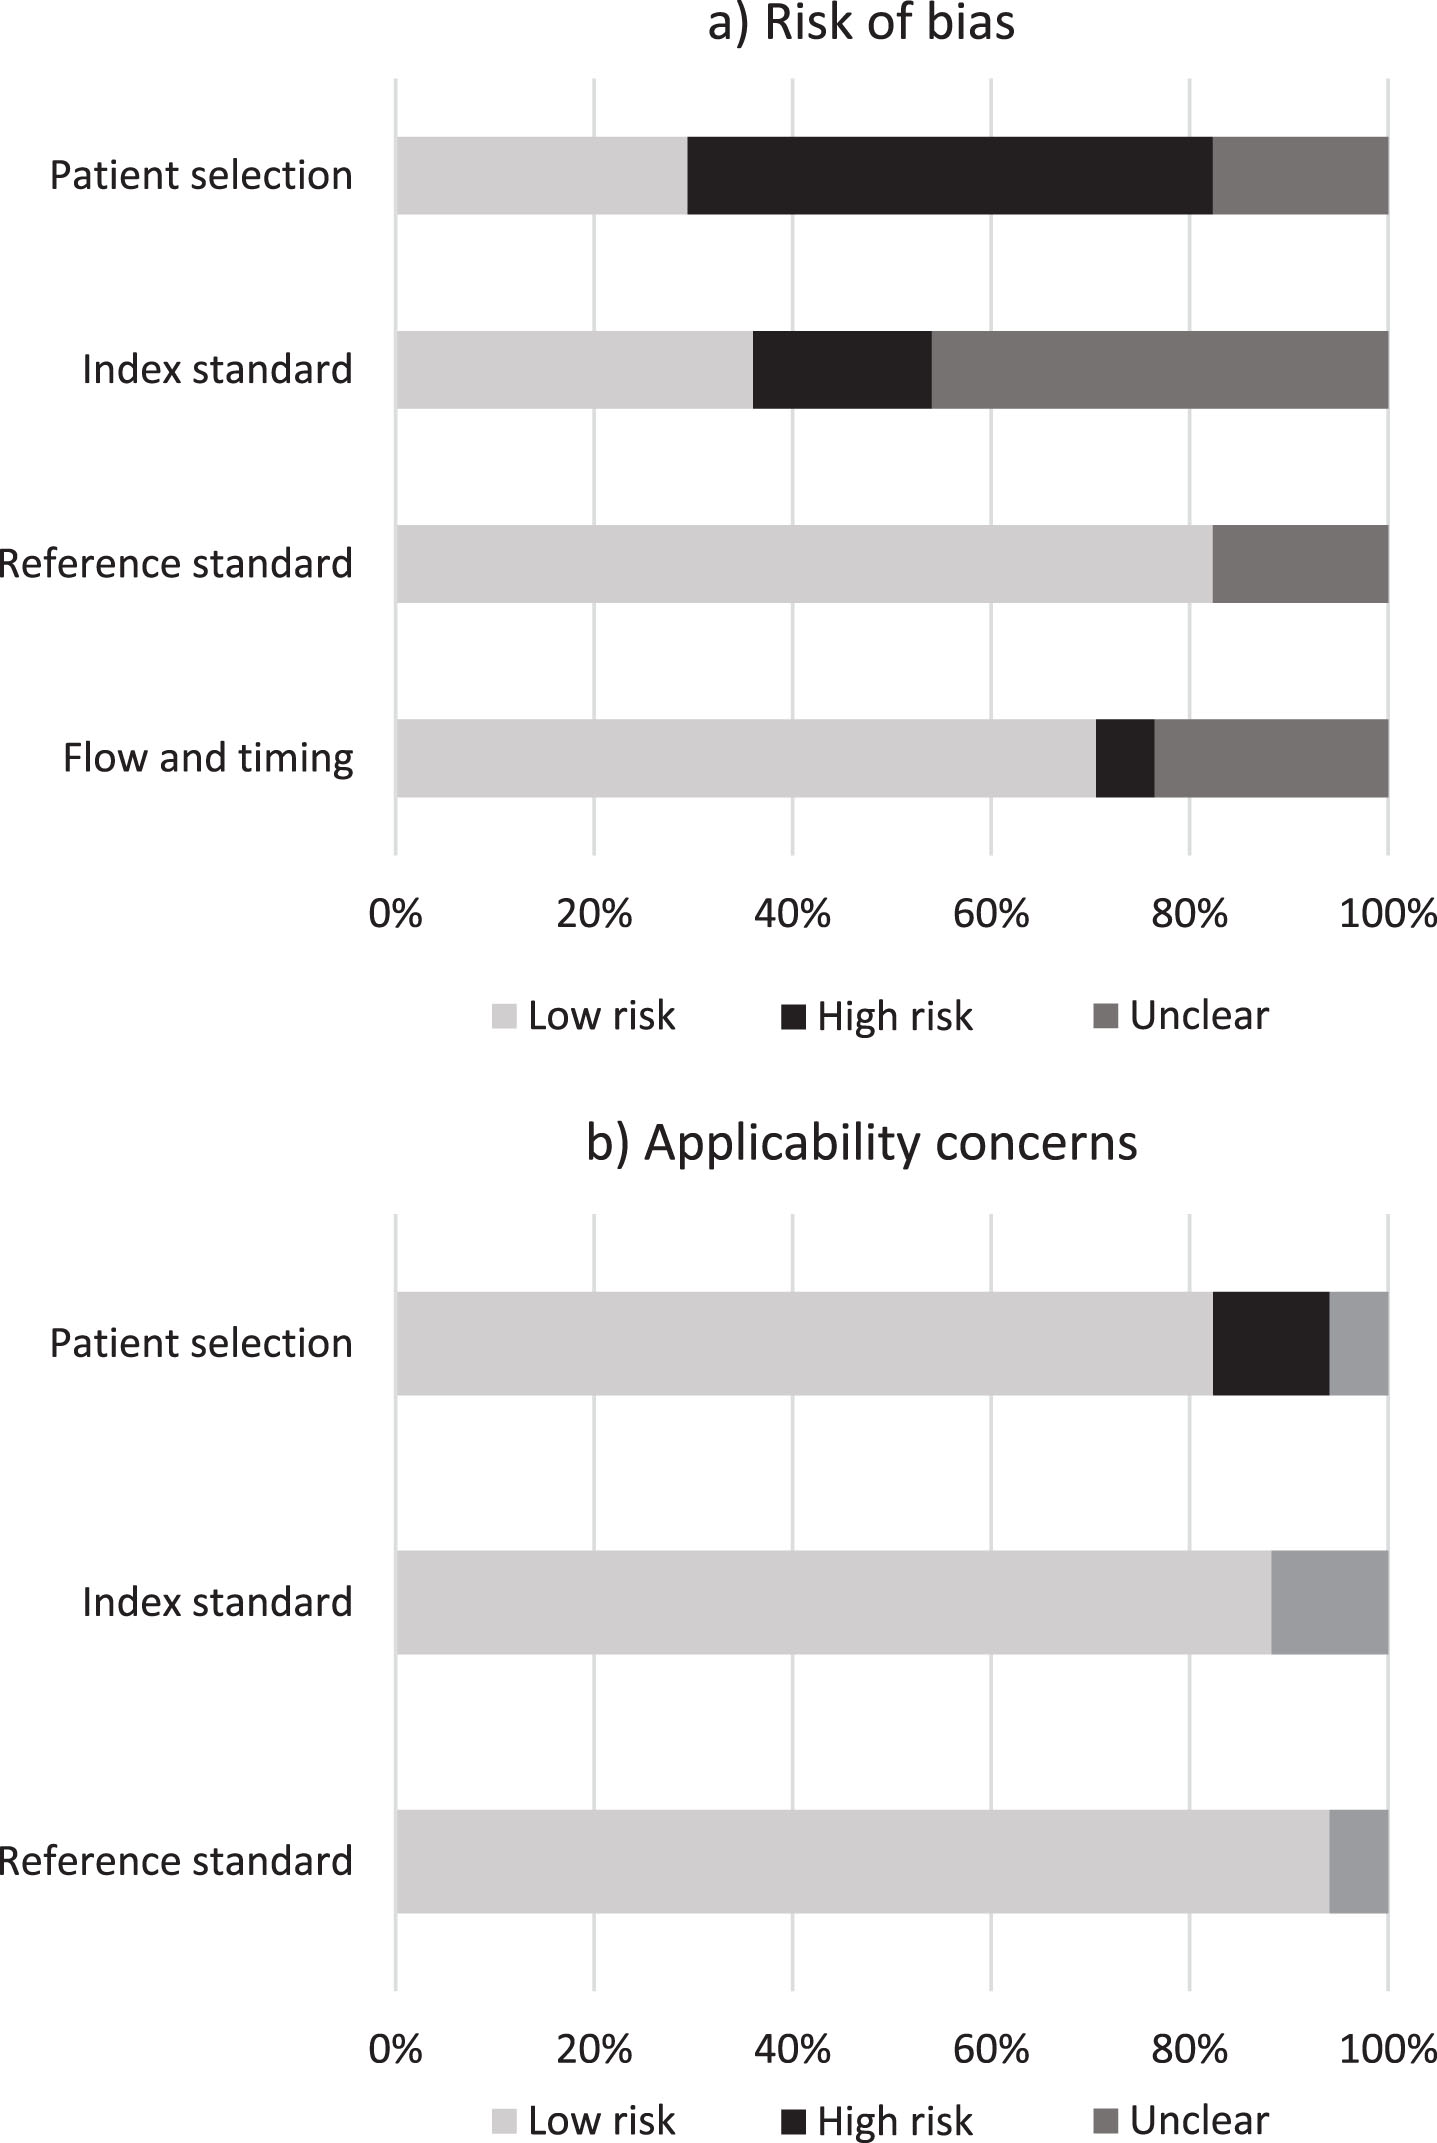 Risk of bias and concerns about applicability. Proportion of studies with low, high, and unclear risk of bias (a) and applicability (b). Values represent percentage of studies (n = 17).